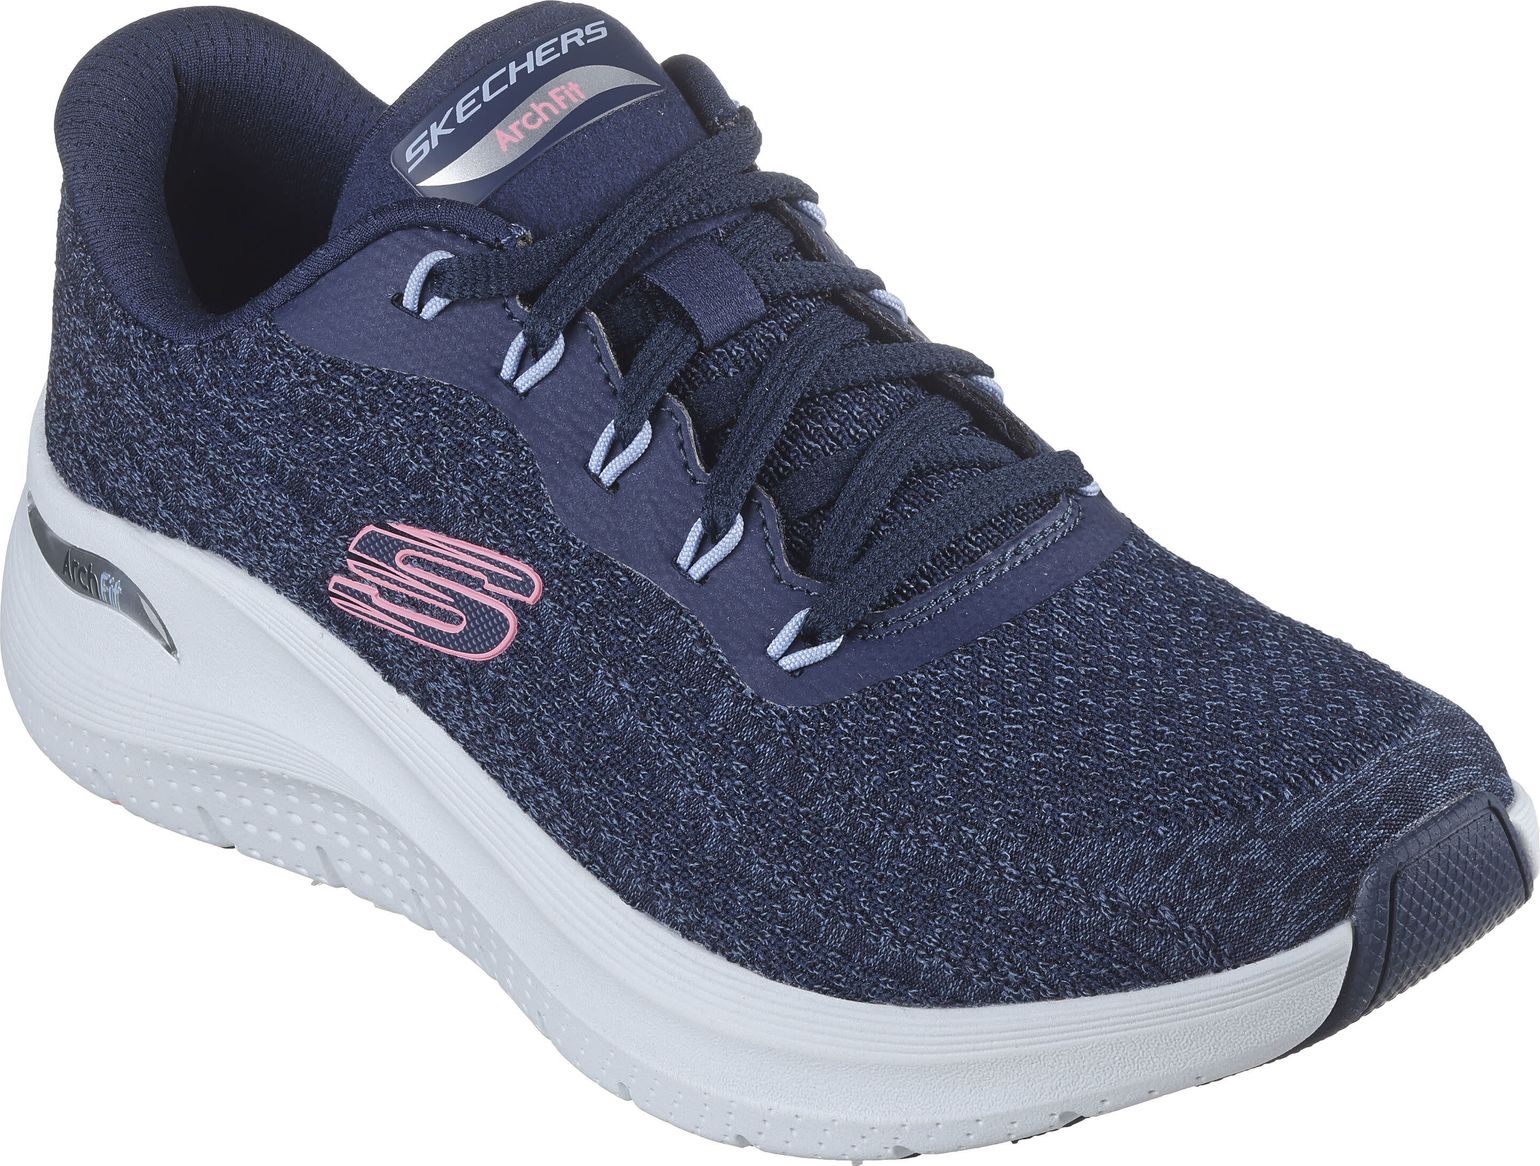 Skechers Women's Arch Fit 2.0 - Rich Vision Nvpk Navy Pink